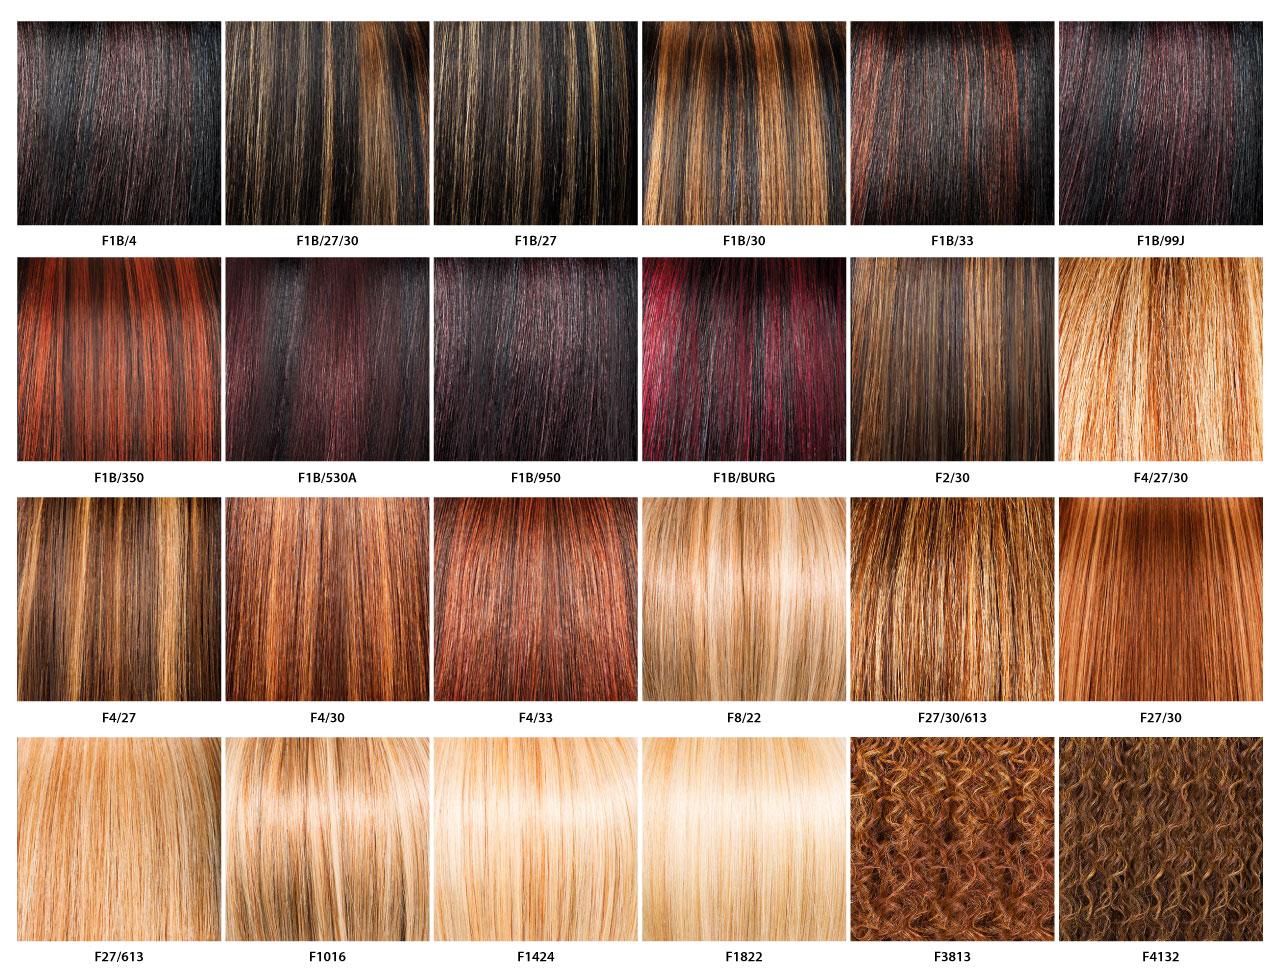 HAIR COLOR CHART 